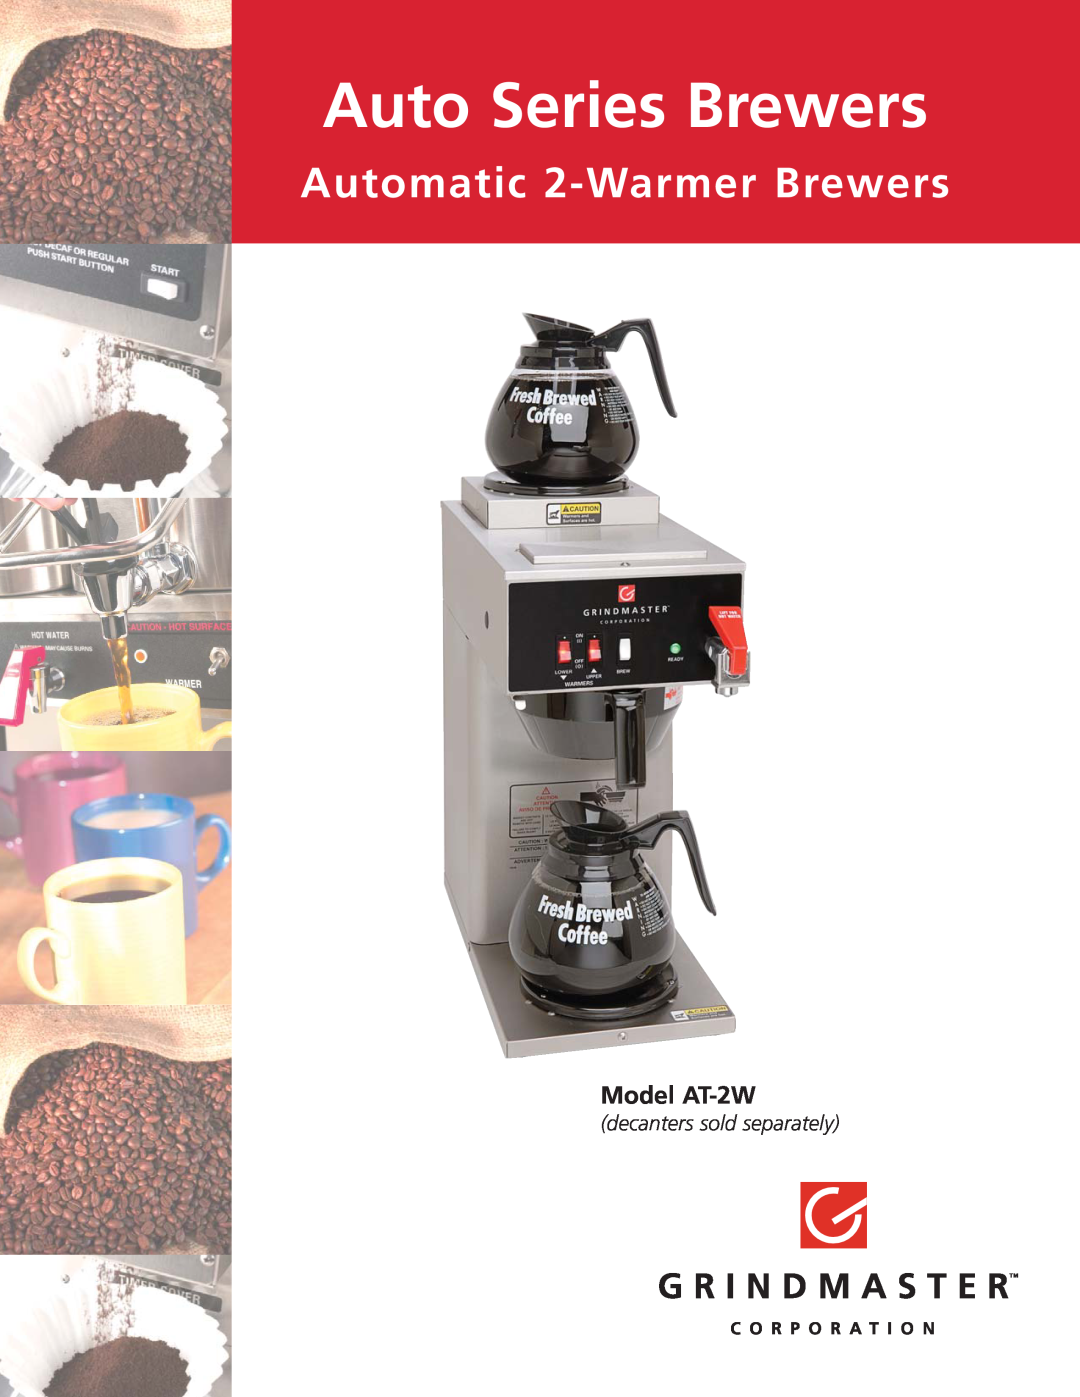 Grindmaster manual Auto Series Brewers, Automatic 2-Warmer Brewers, Model AT-2W, decanters sold separately 